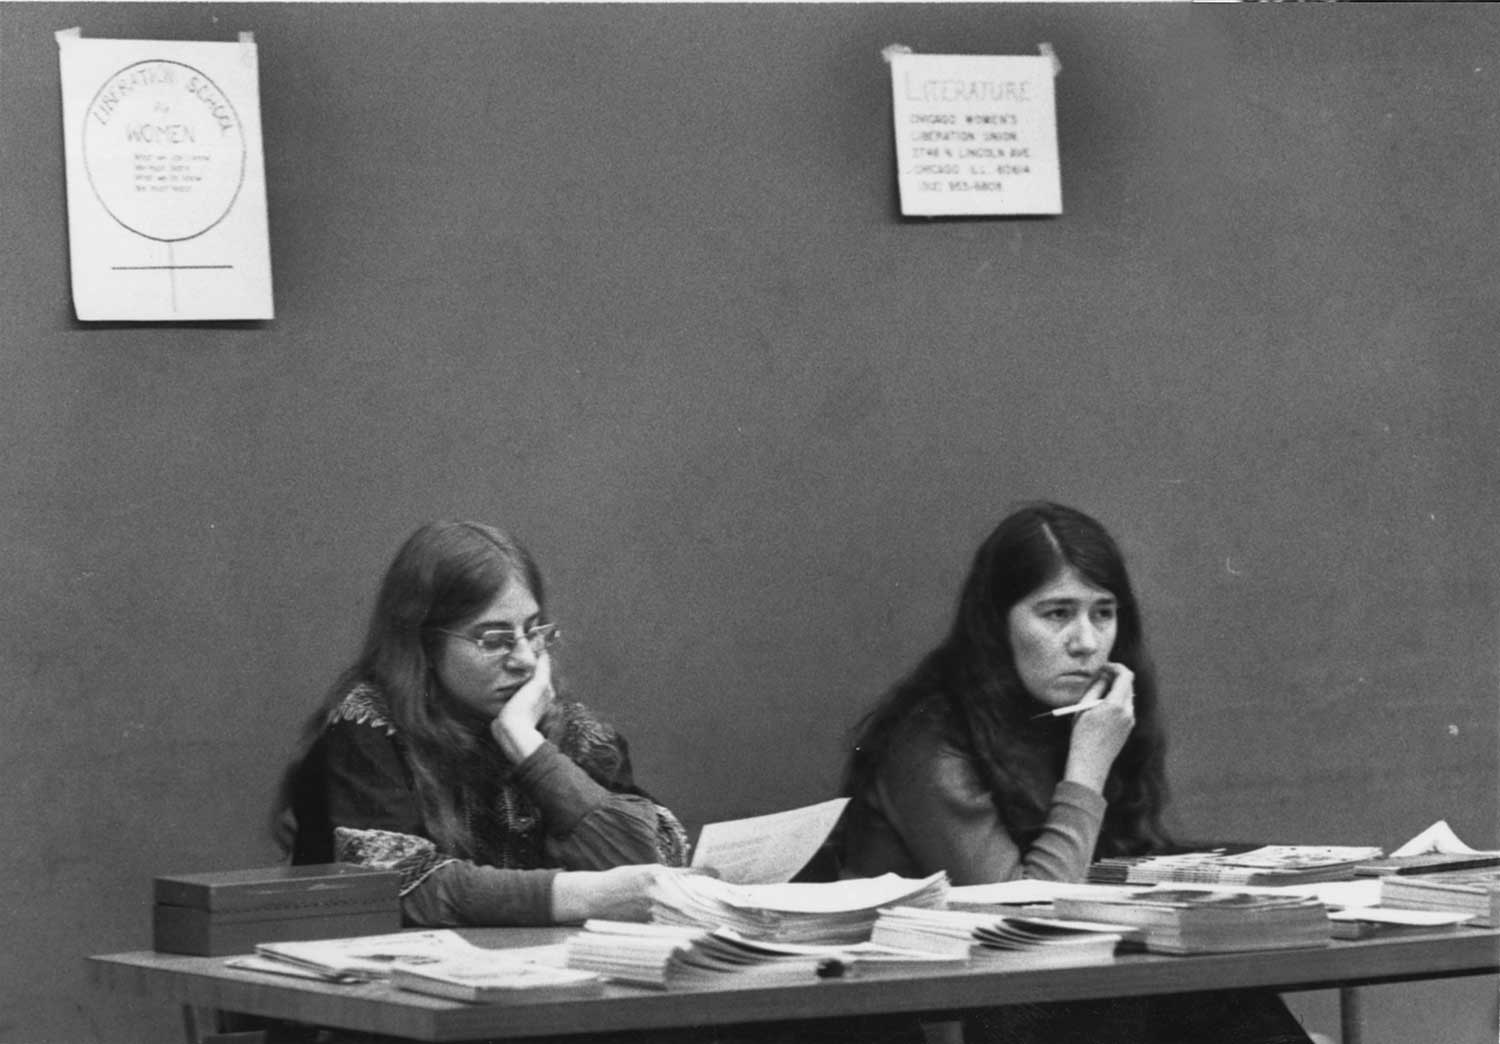 Penny and Laura - Liberation School, c. 1974